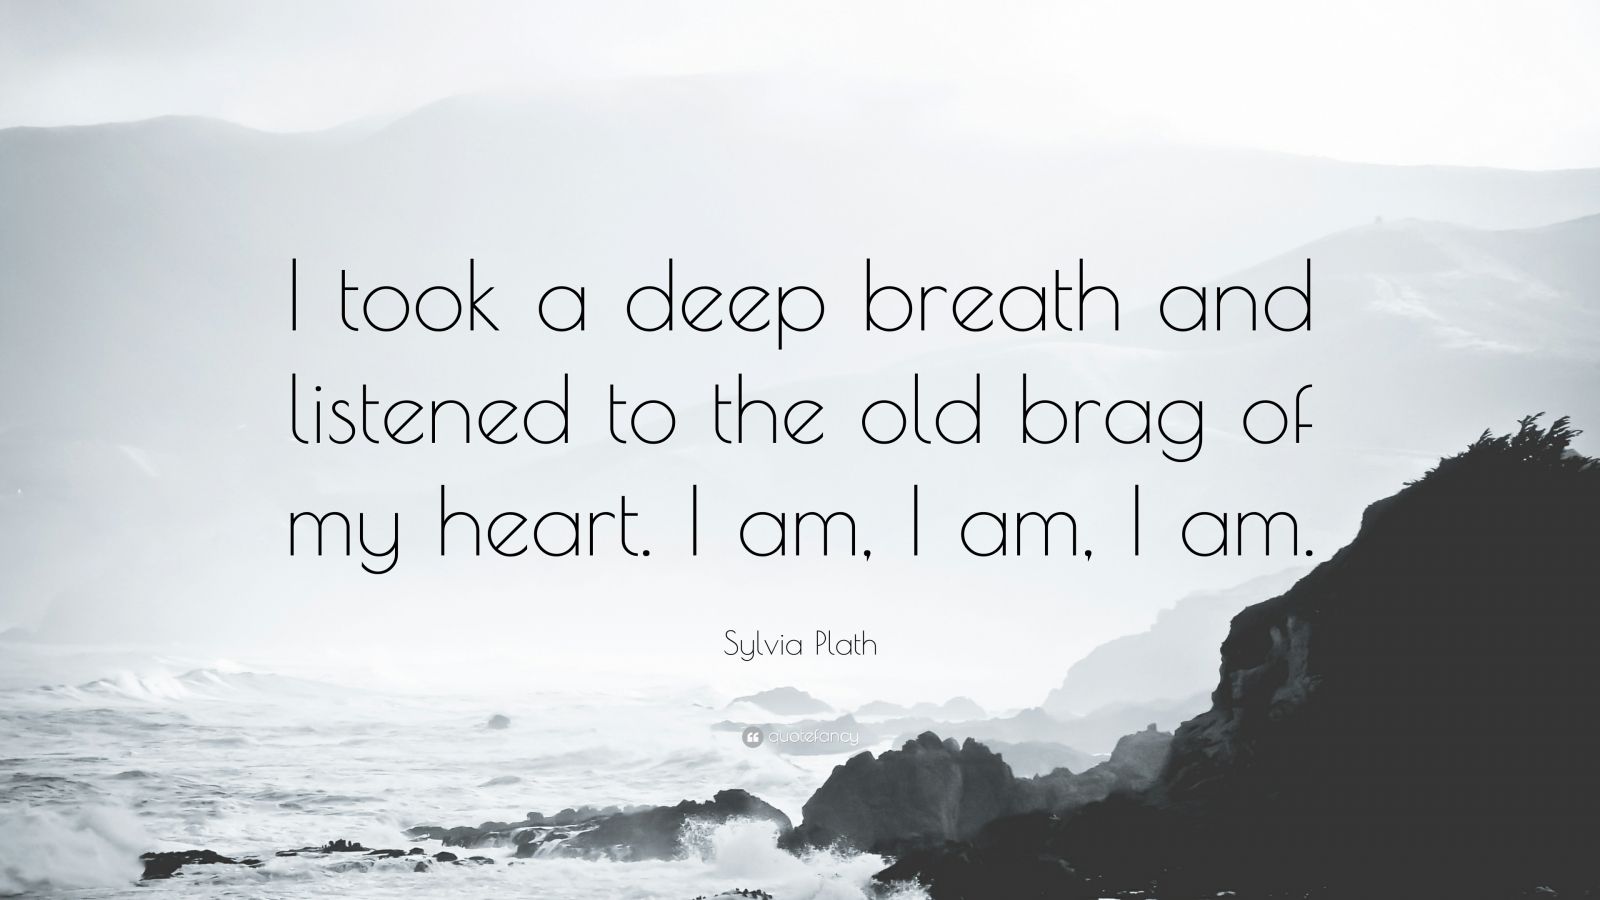 sylvia-plath-quote-i-took-a-deep-breath-and-listened-to-the-old-brag